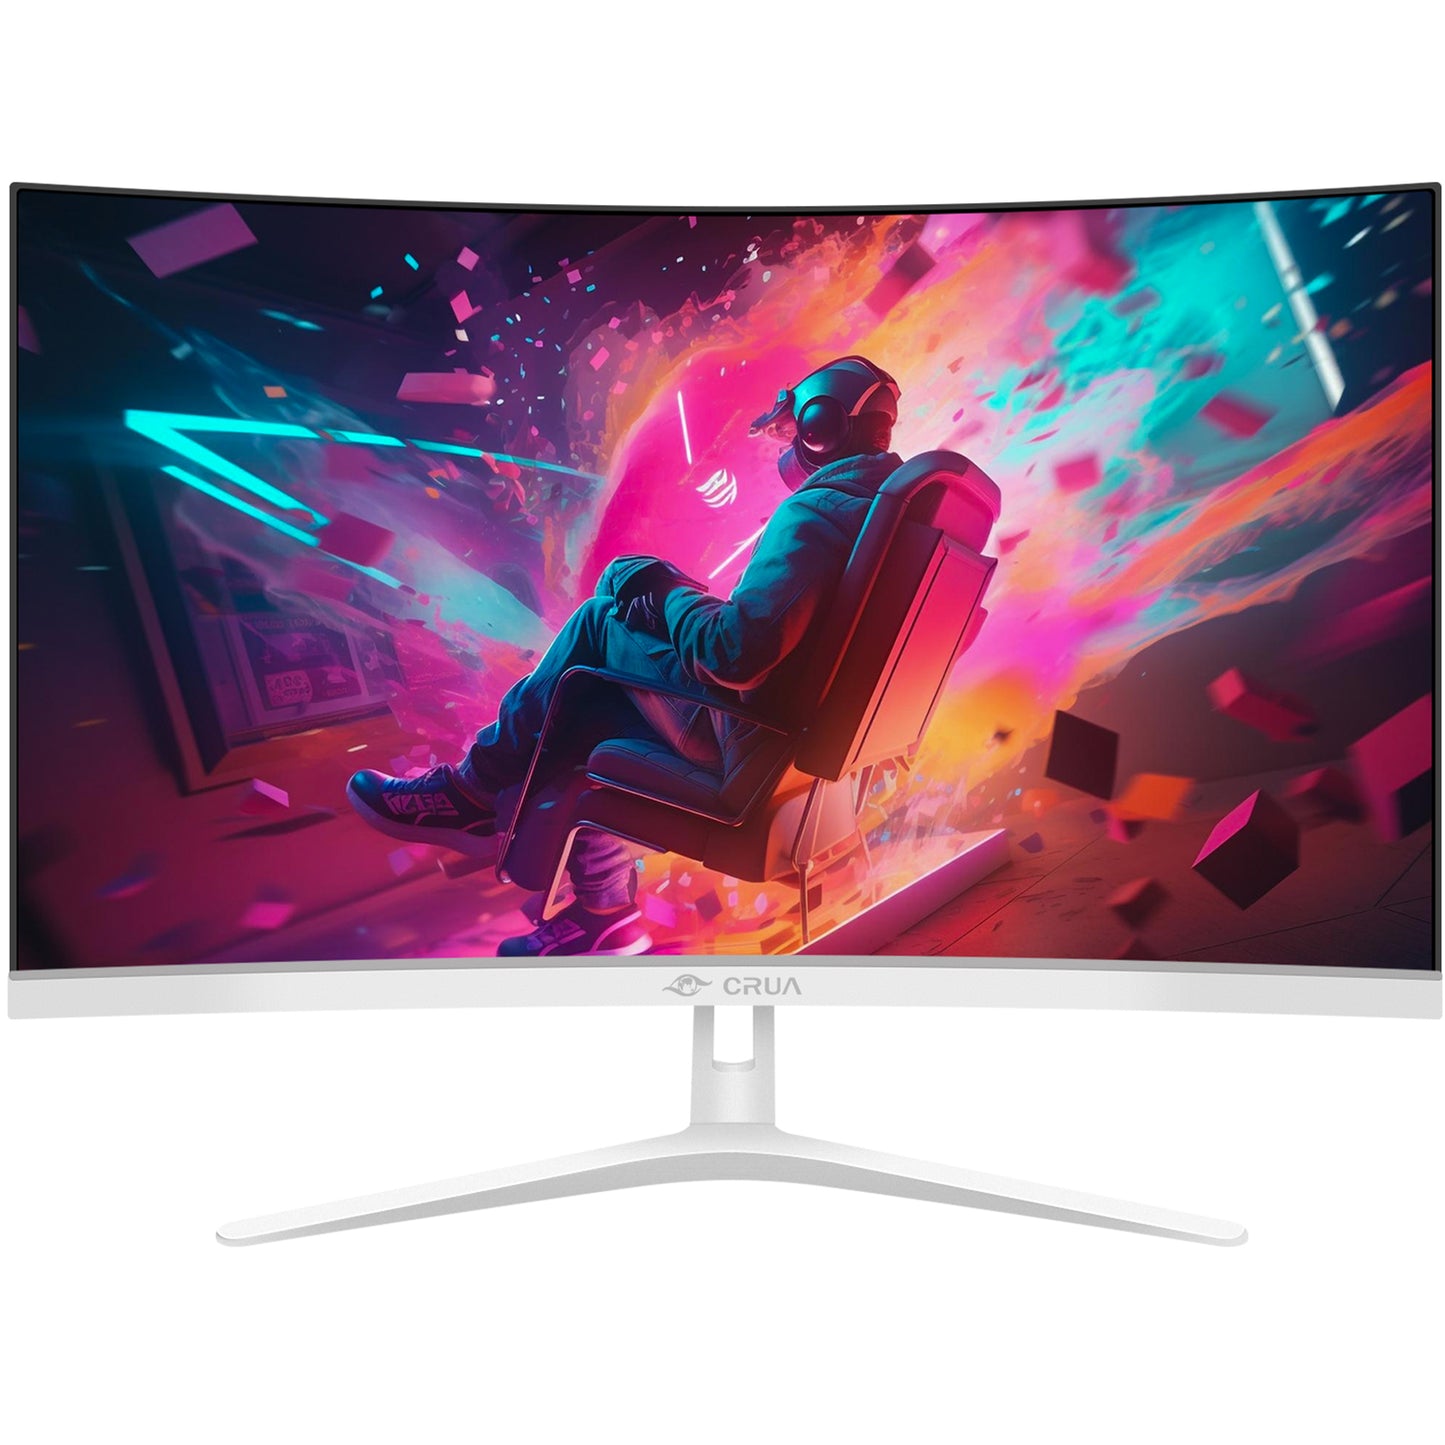 27" FHD 100Hz Curved Monitor for Office/Gaming